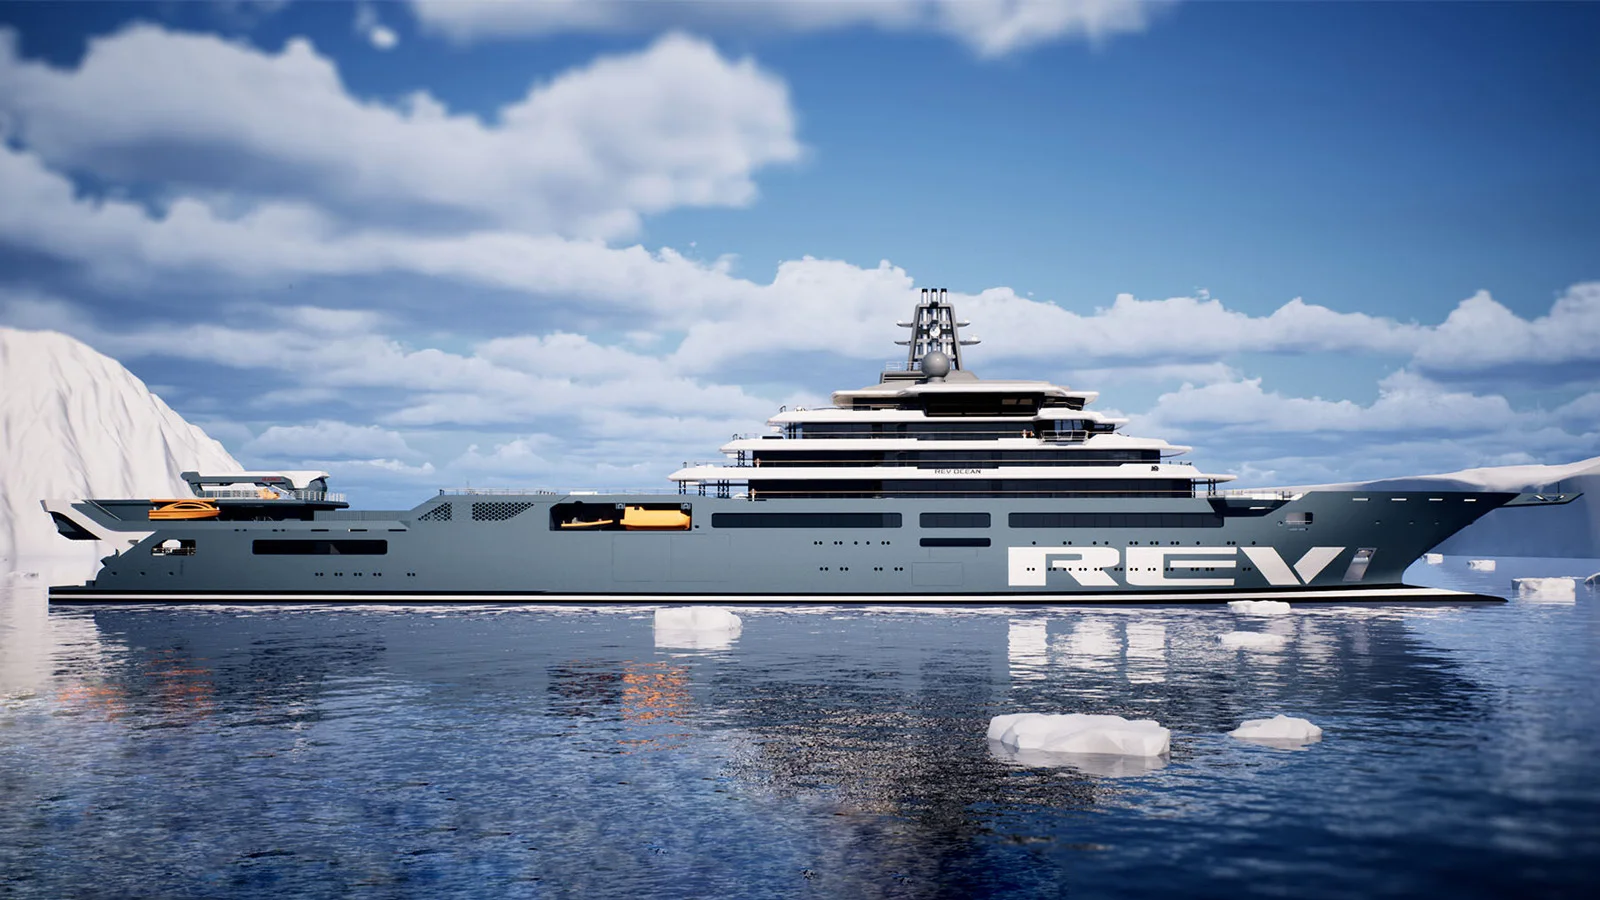 The 182.9-meter explorer REV Ocean claims to be the largest yacht in the world (Vard, 2026)